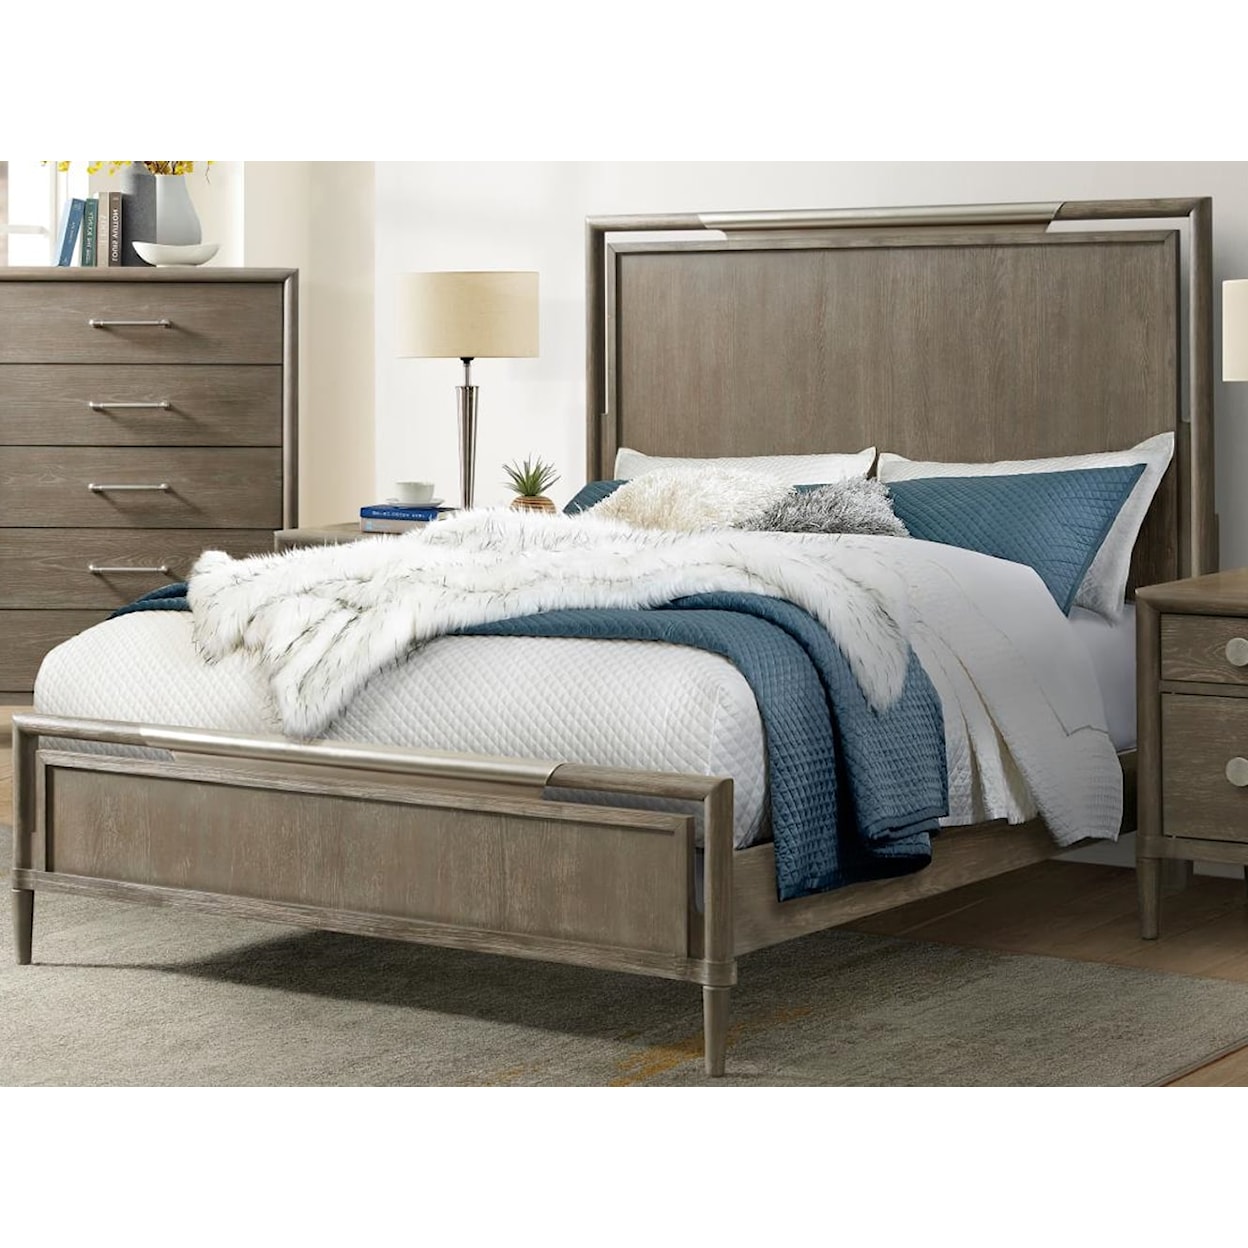 Martin Svensson Home Dolce Dolce Queen Bed